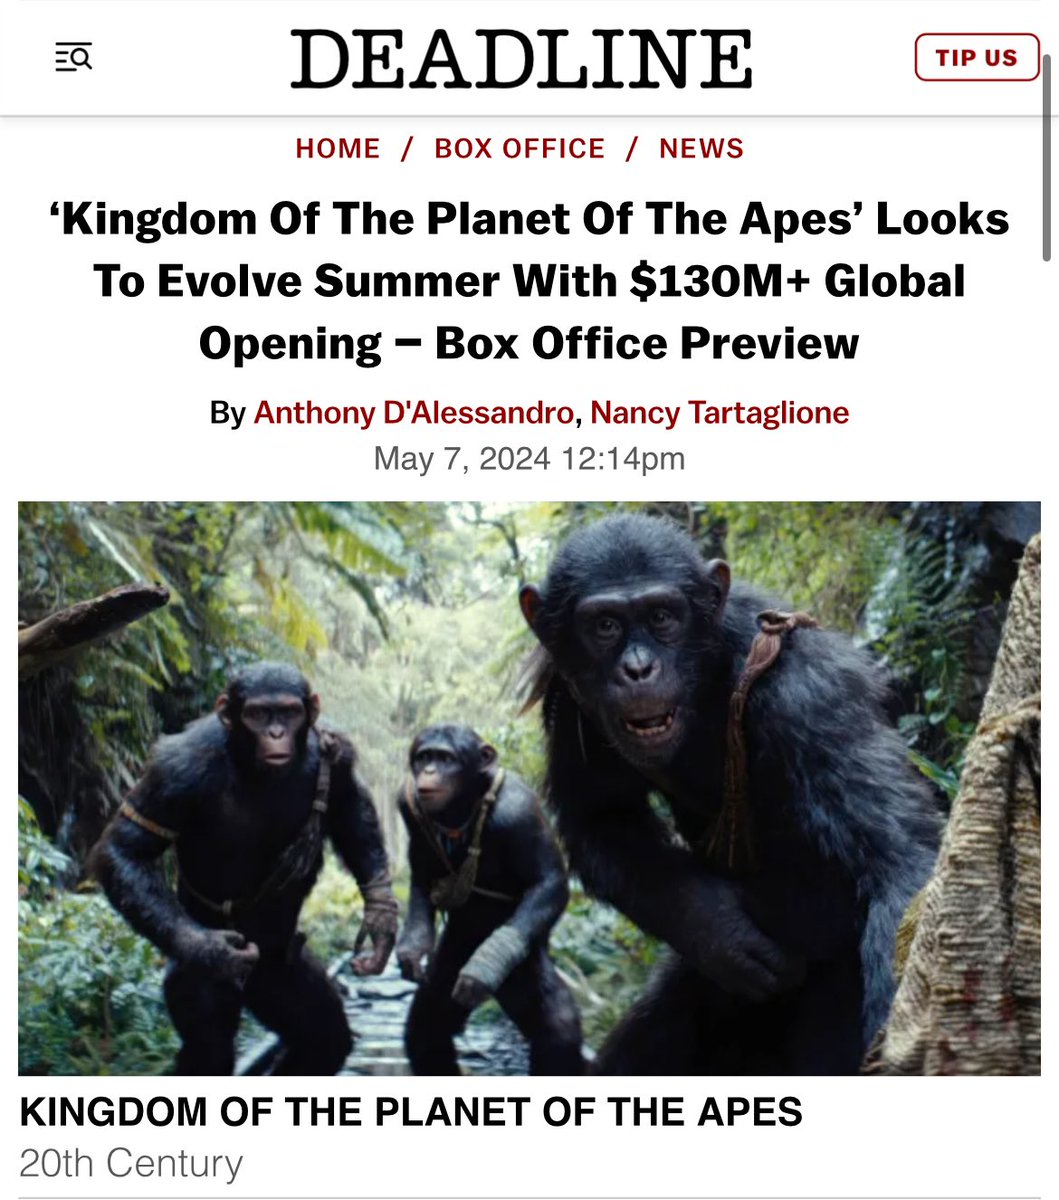 ‘Kingdom Of The Planet Of The Apes’ Looks To Evolve Summer With $130M+ Global Opening – Box Office Preview
In Japan Box Office, Planet of the Apes will lose to Detective Conan.
#kingdomoftheplanetoftheapes #theplanetoftheapes #owenteague #wesball #20thcenturystudios #scifimovie